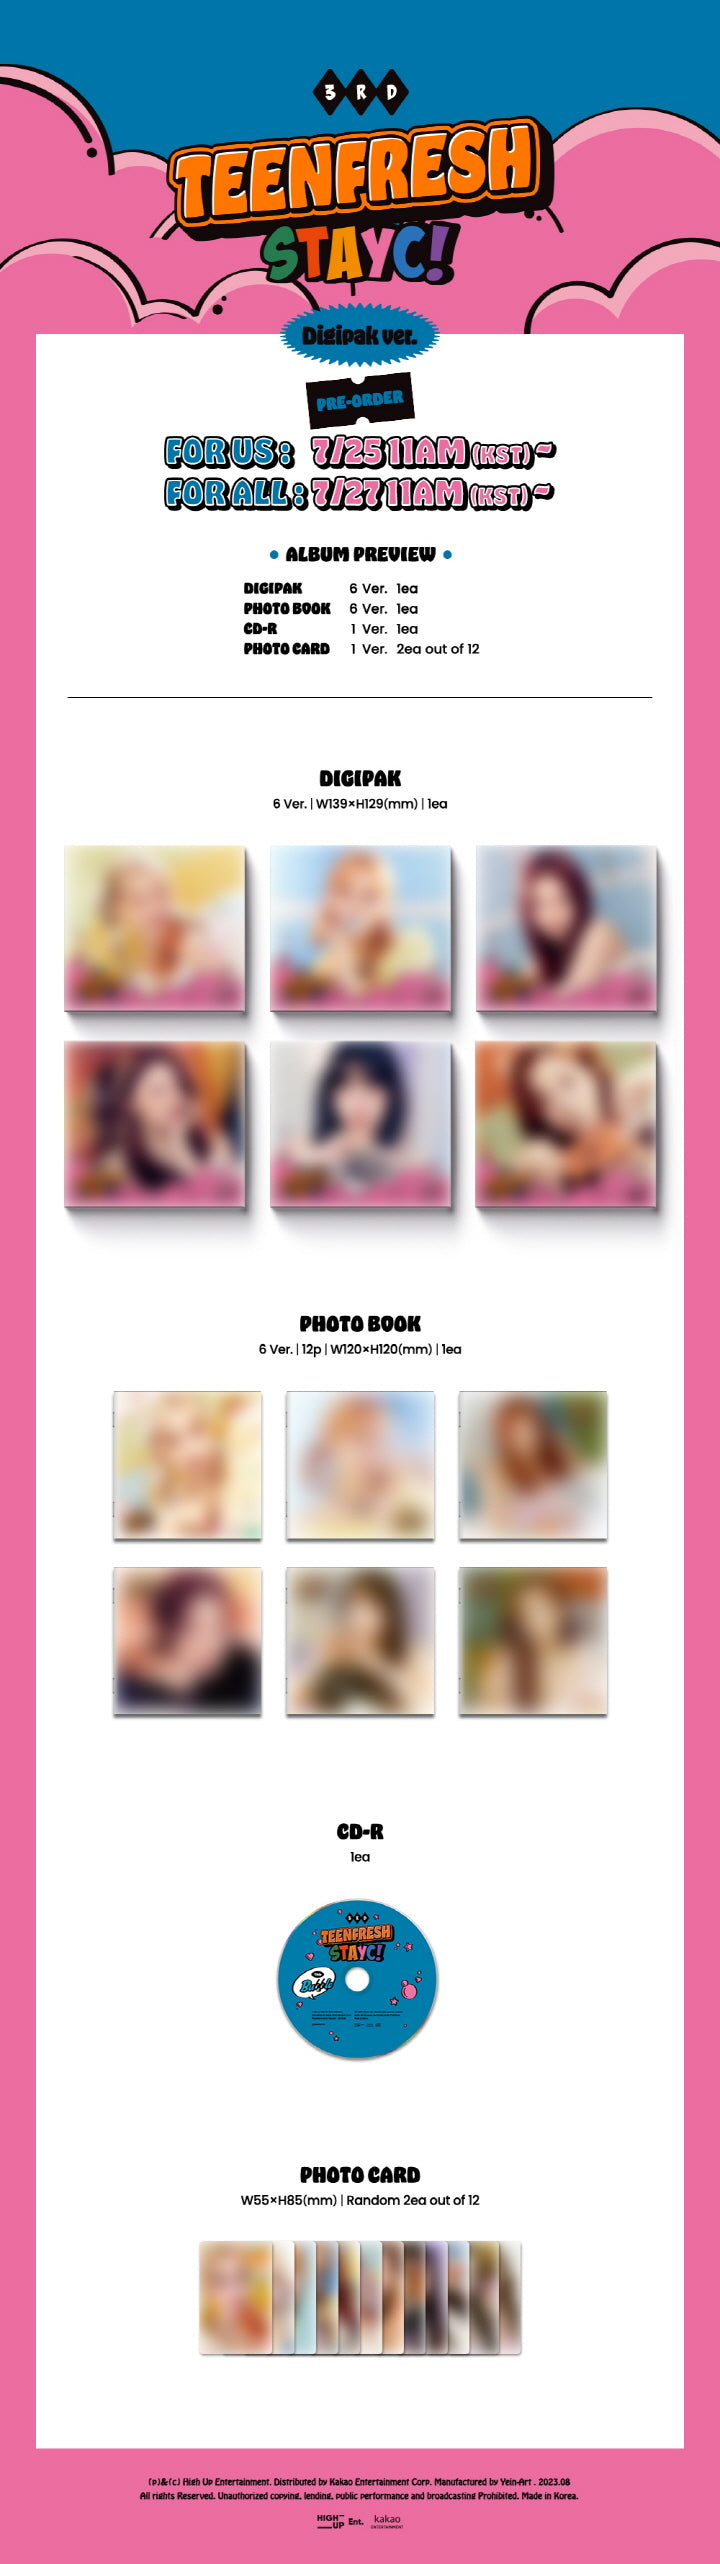 1 CD
1 Photo Book (12 pages)
2 Photo Cards (random out of 12 types)